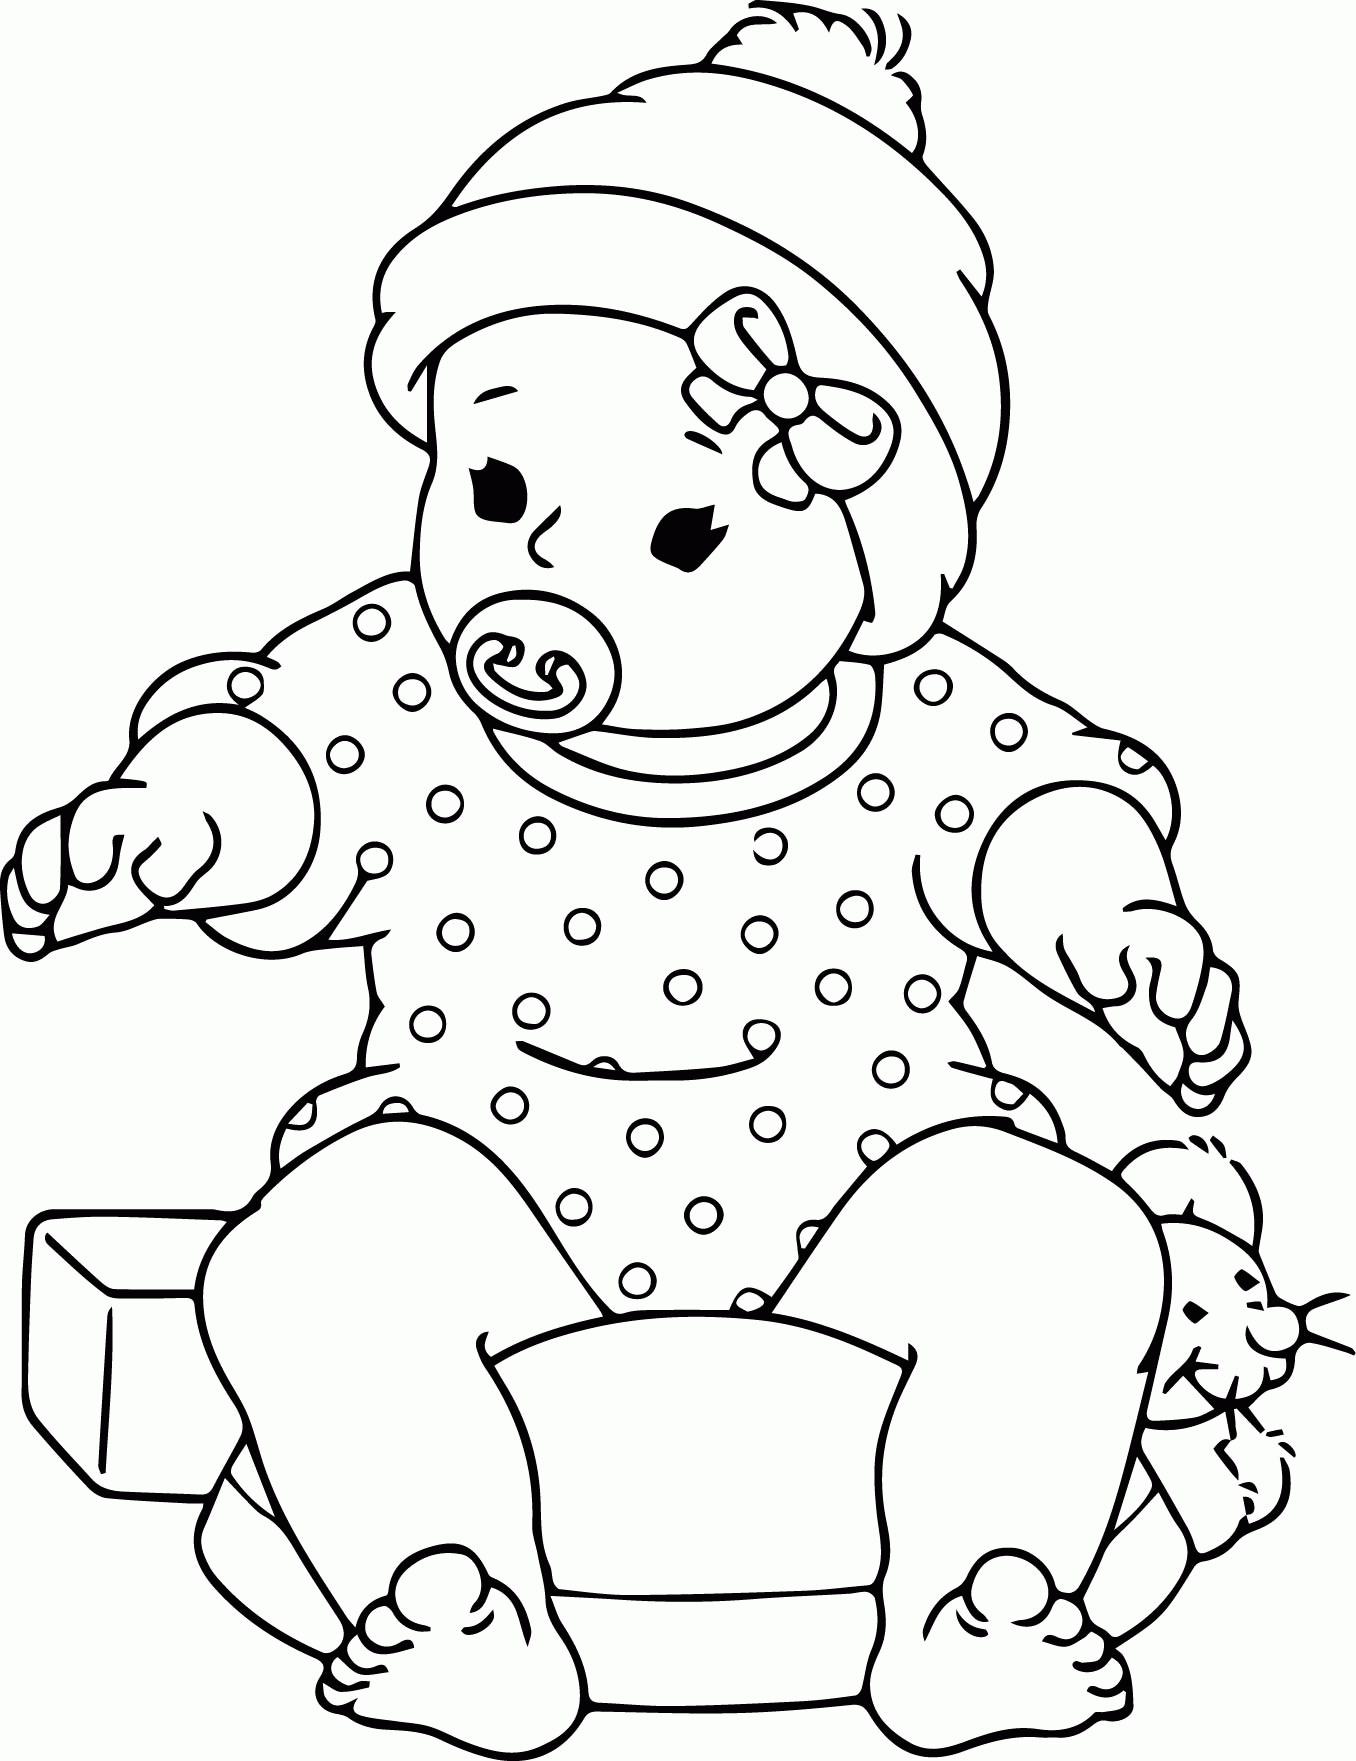 Free Baby Image Coloring Page, Download Free Baby Image Coloring Page